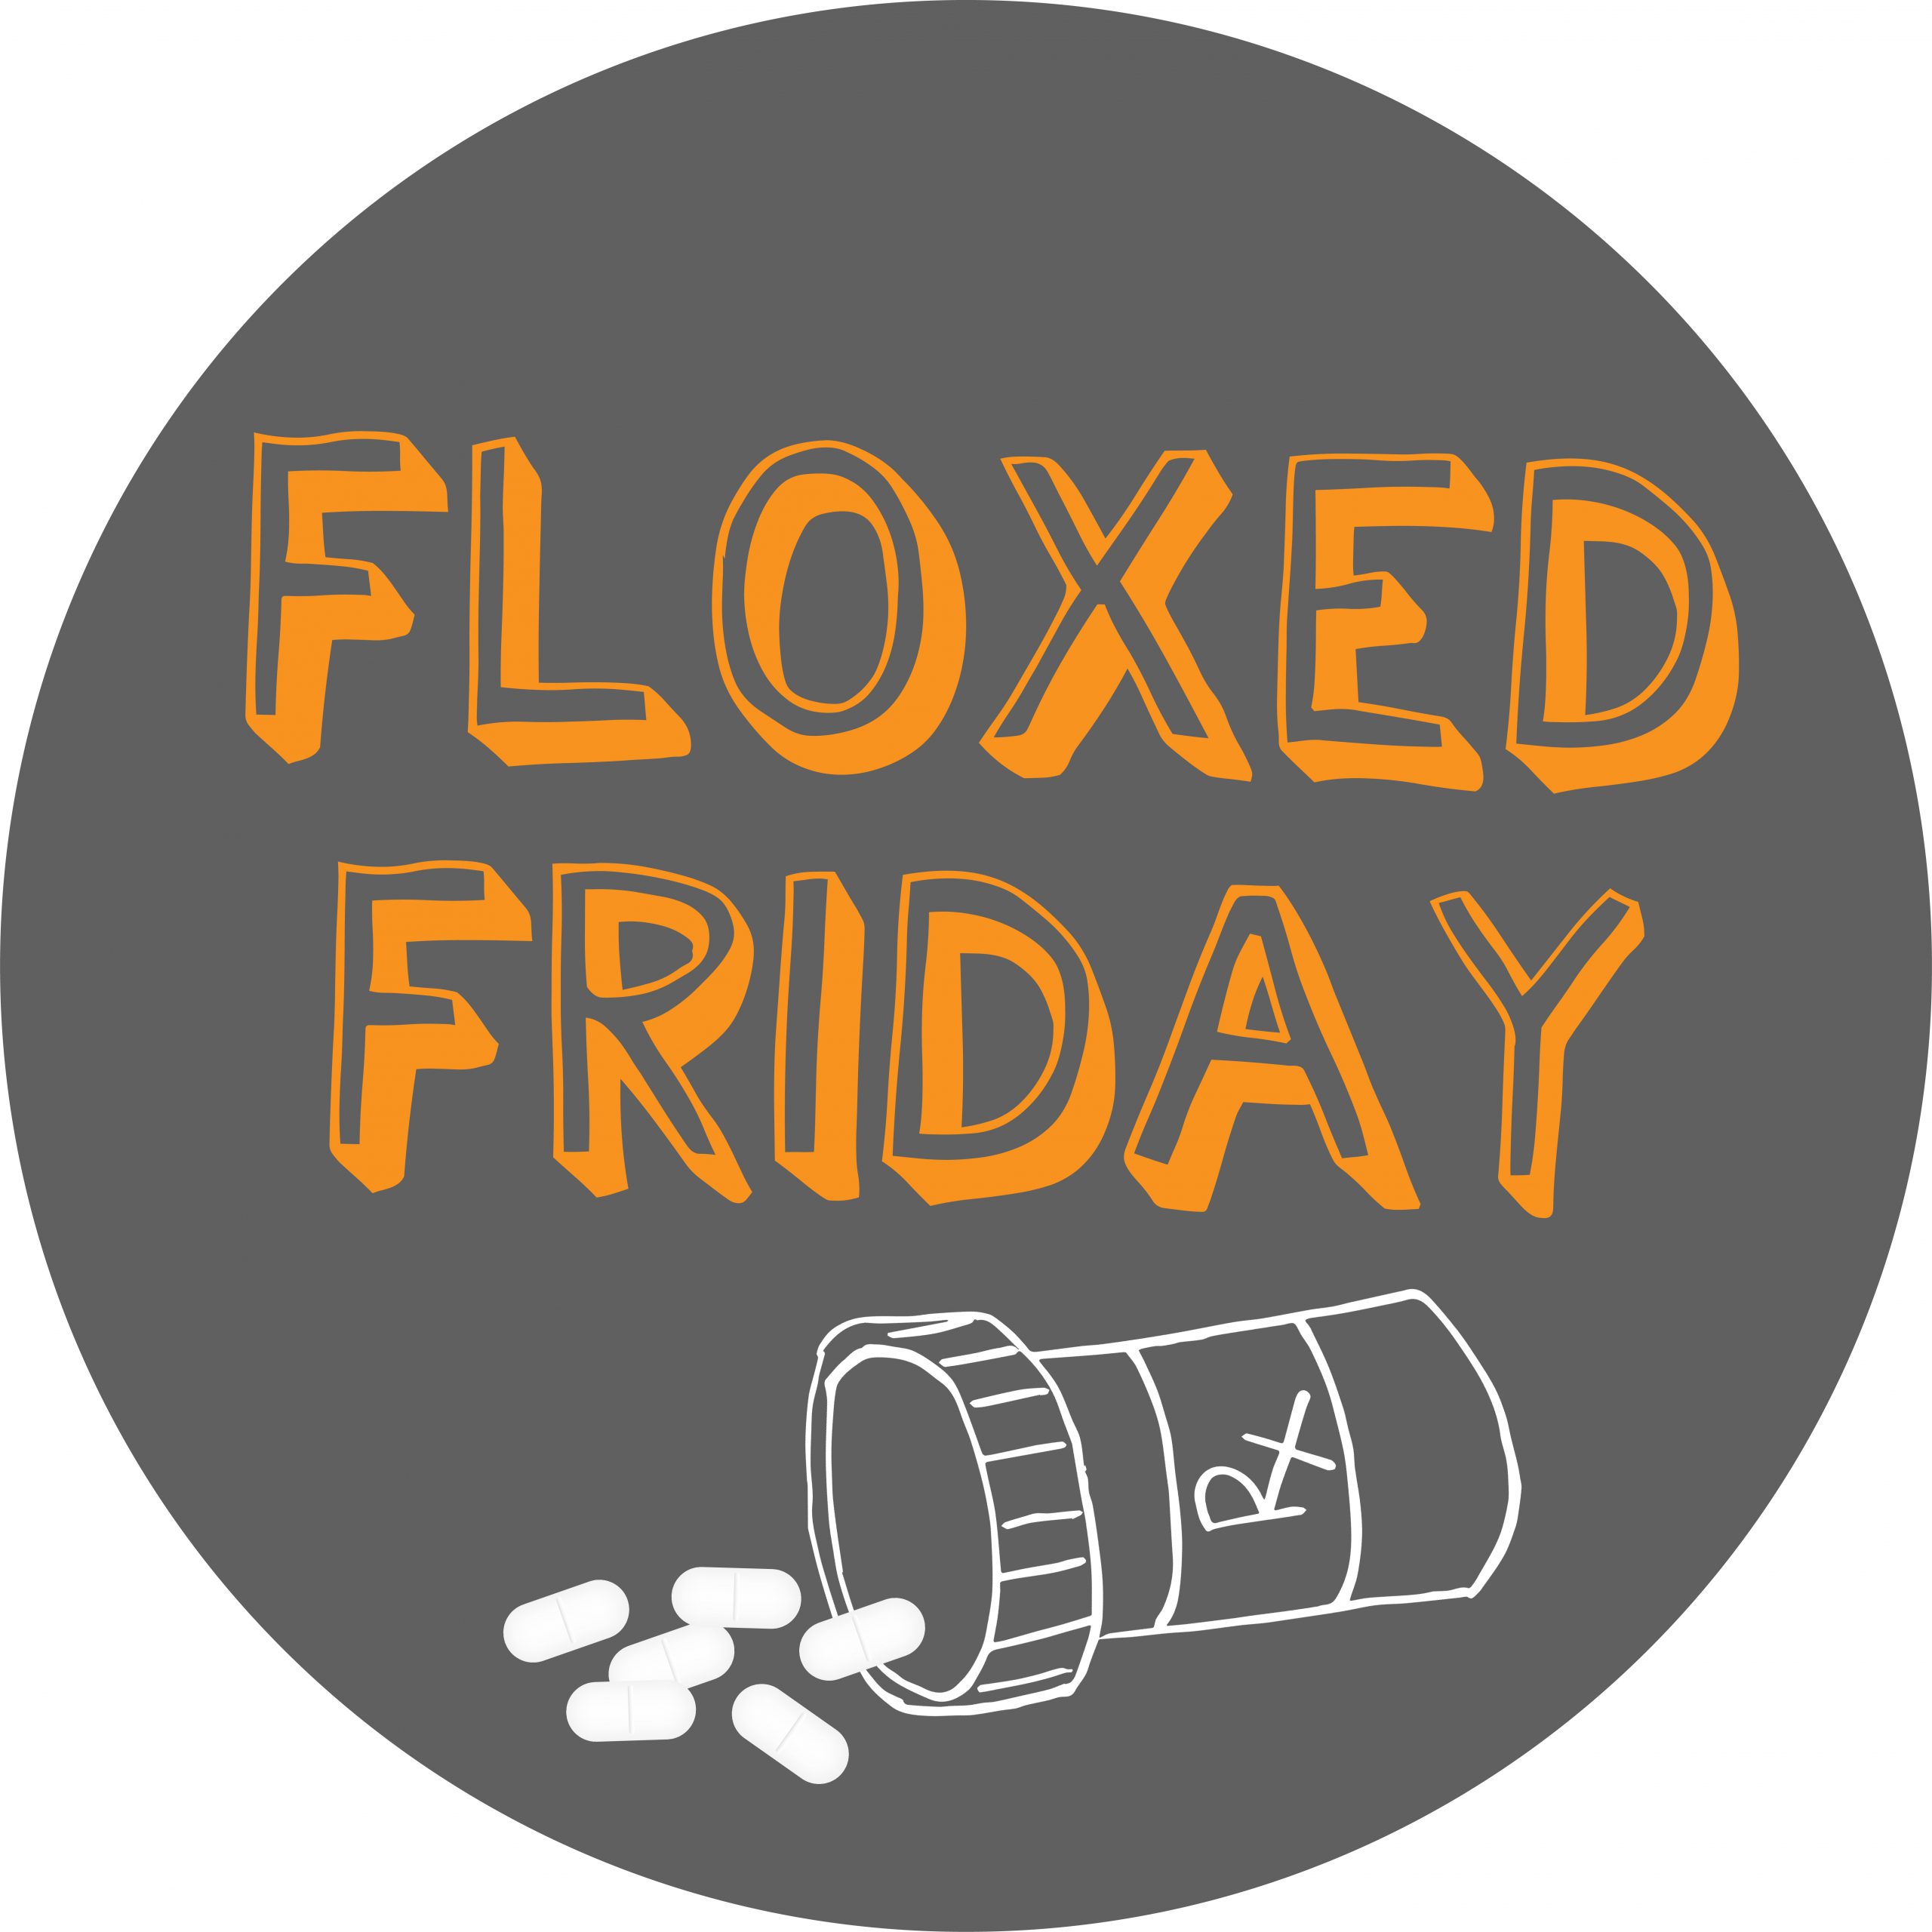 Floxed Friday – Why Don’t You Sue?